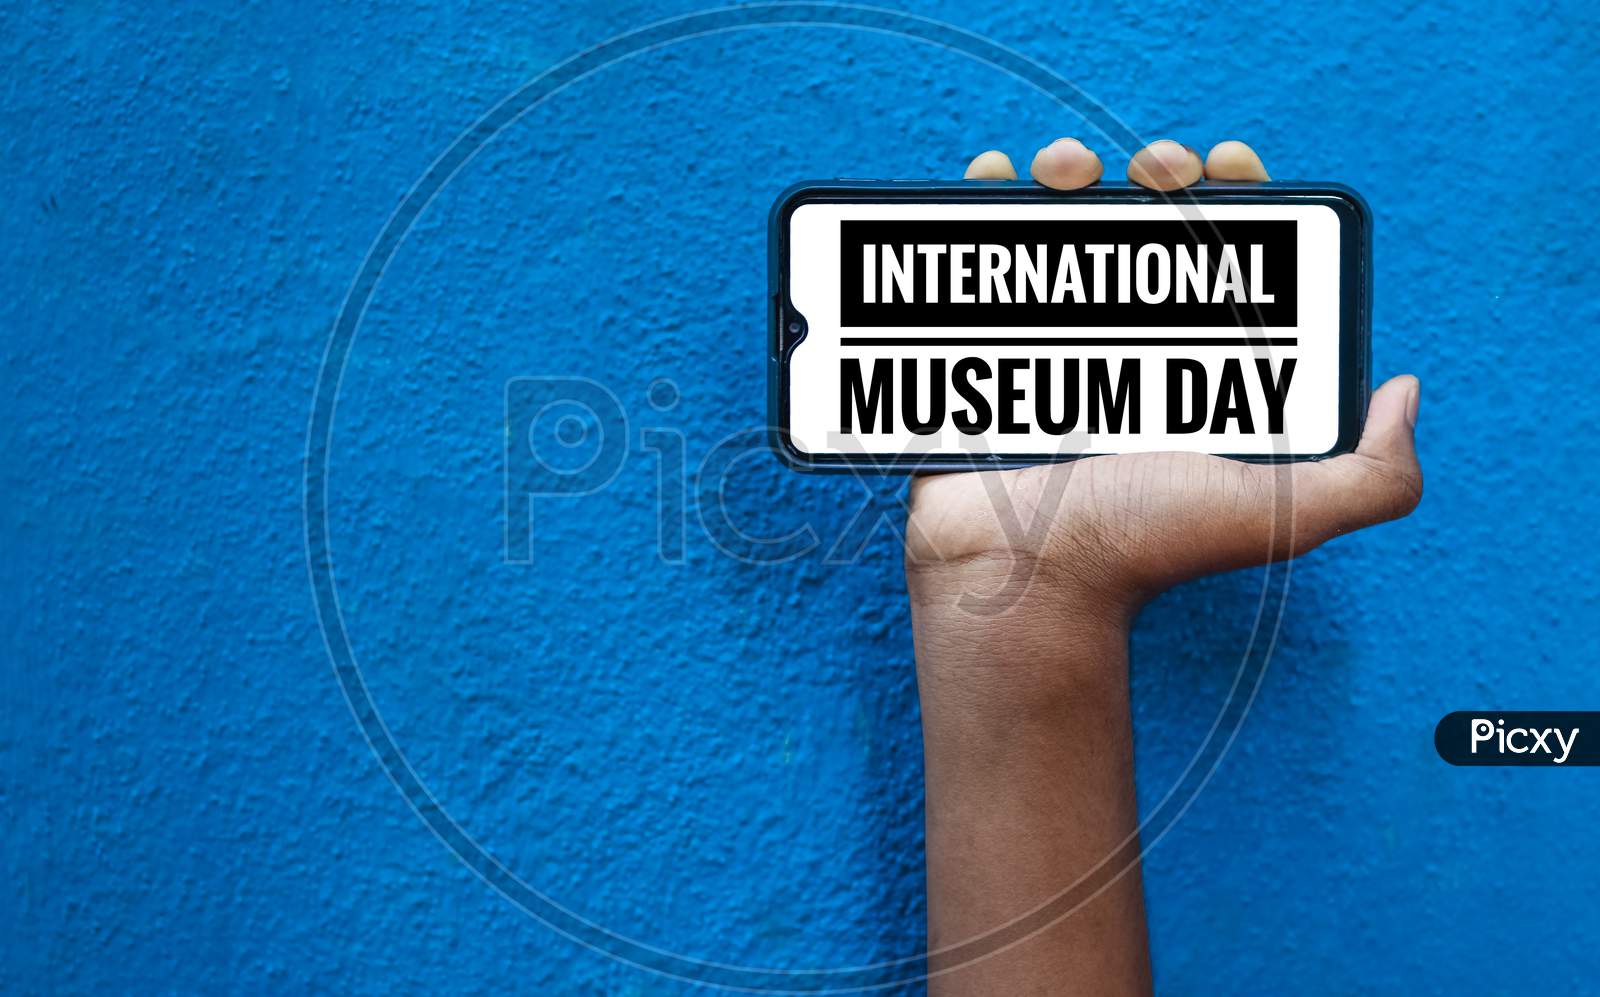 18 May - International Museum Day Word On Mobile Smart Phone Screen With Isolated On Blue Background. International Museum Day With Space For Text.